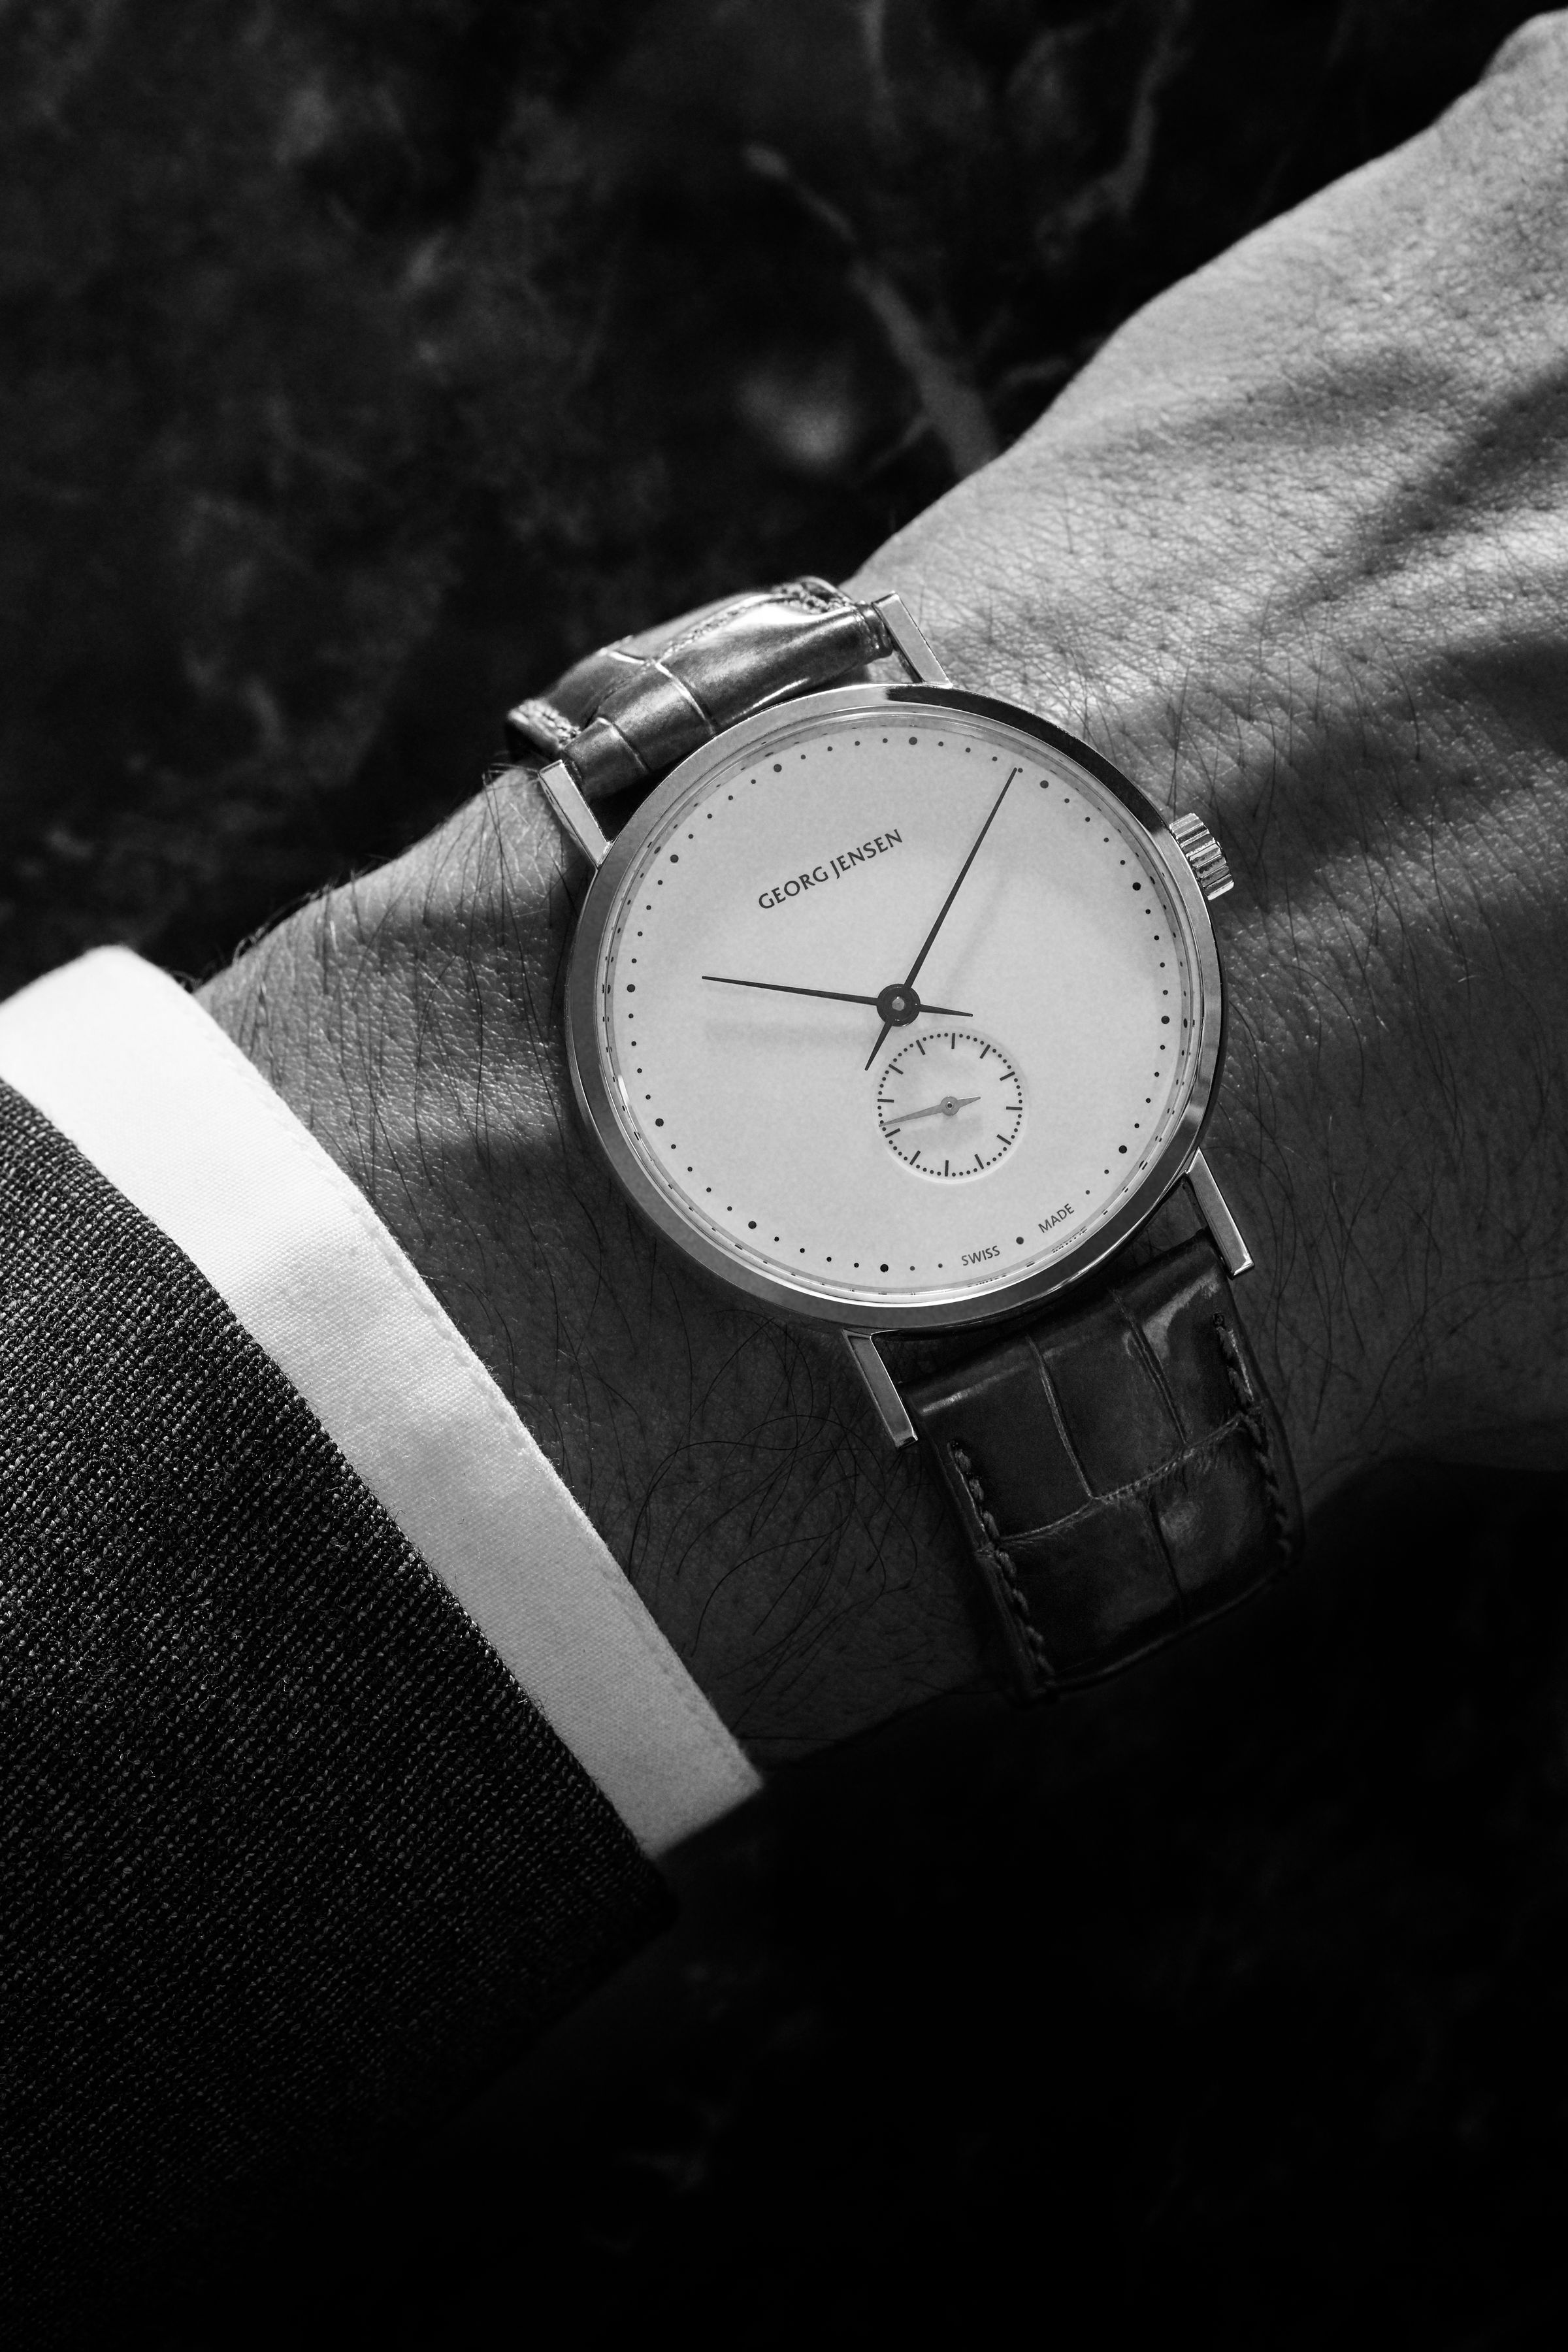 Georg Jensen men's watches campaign photography